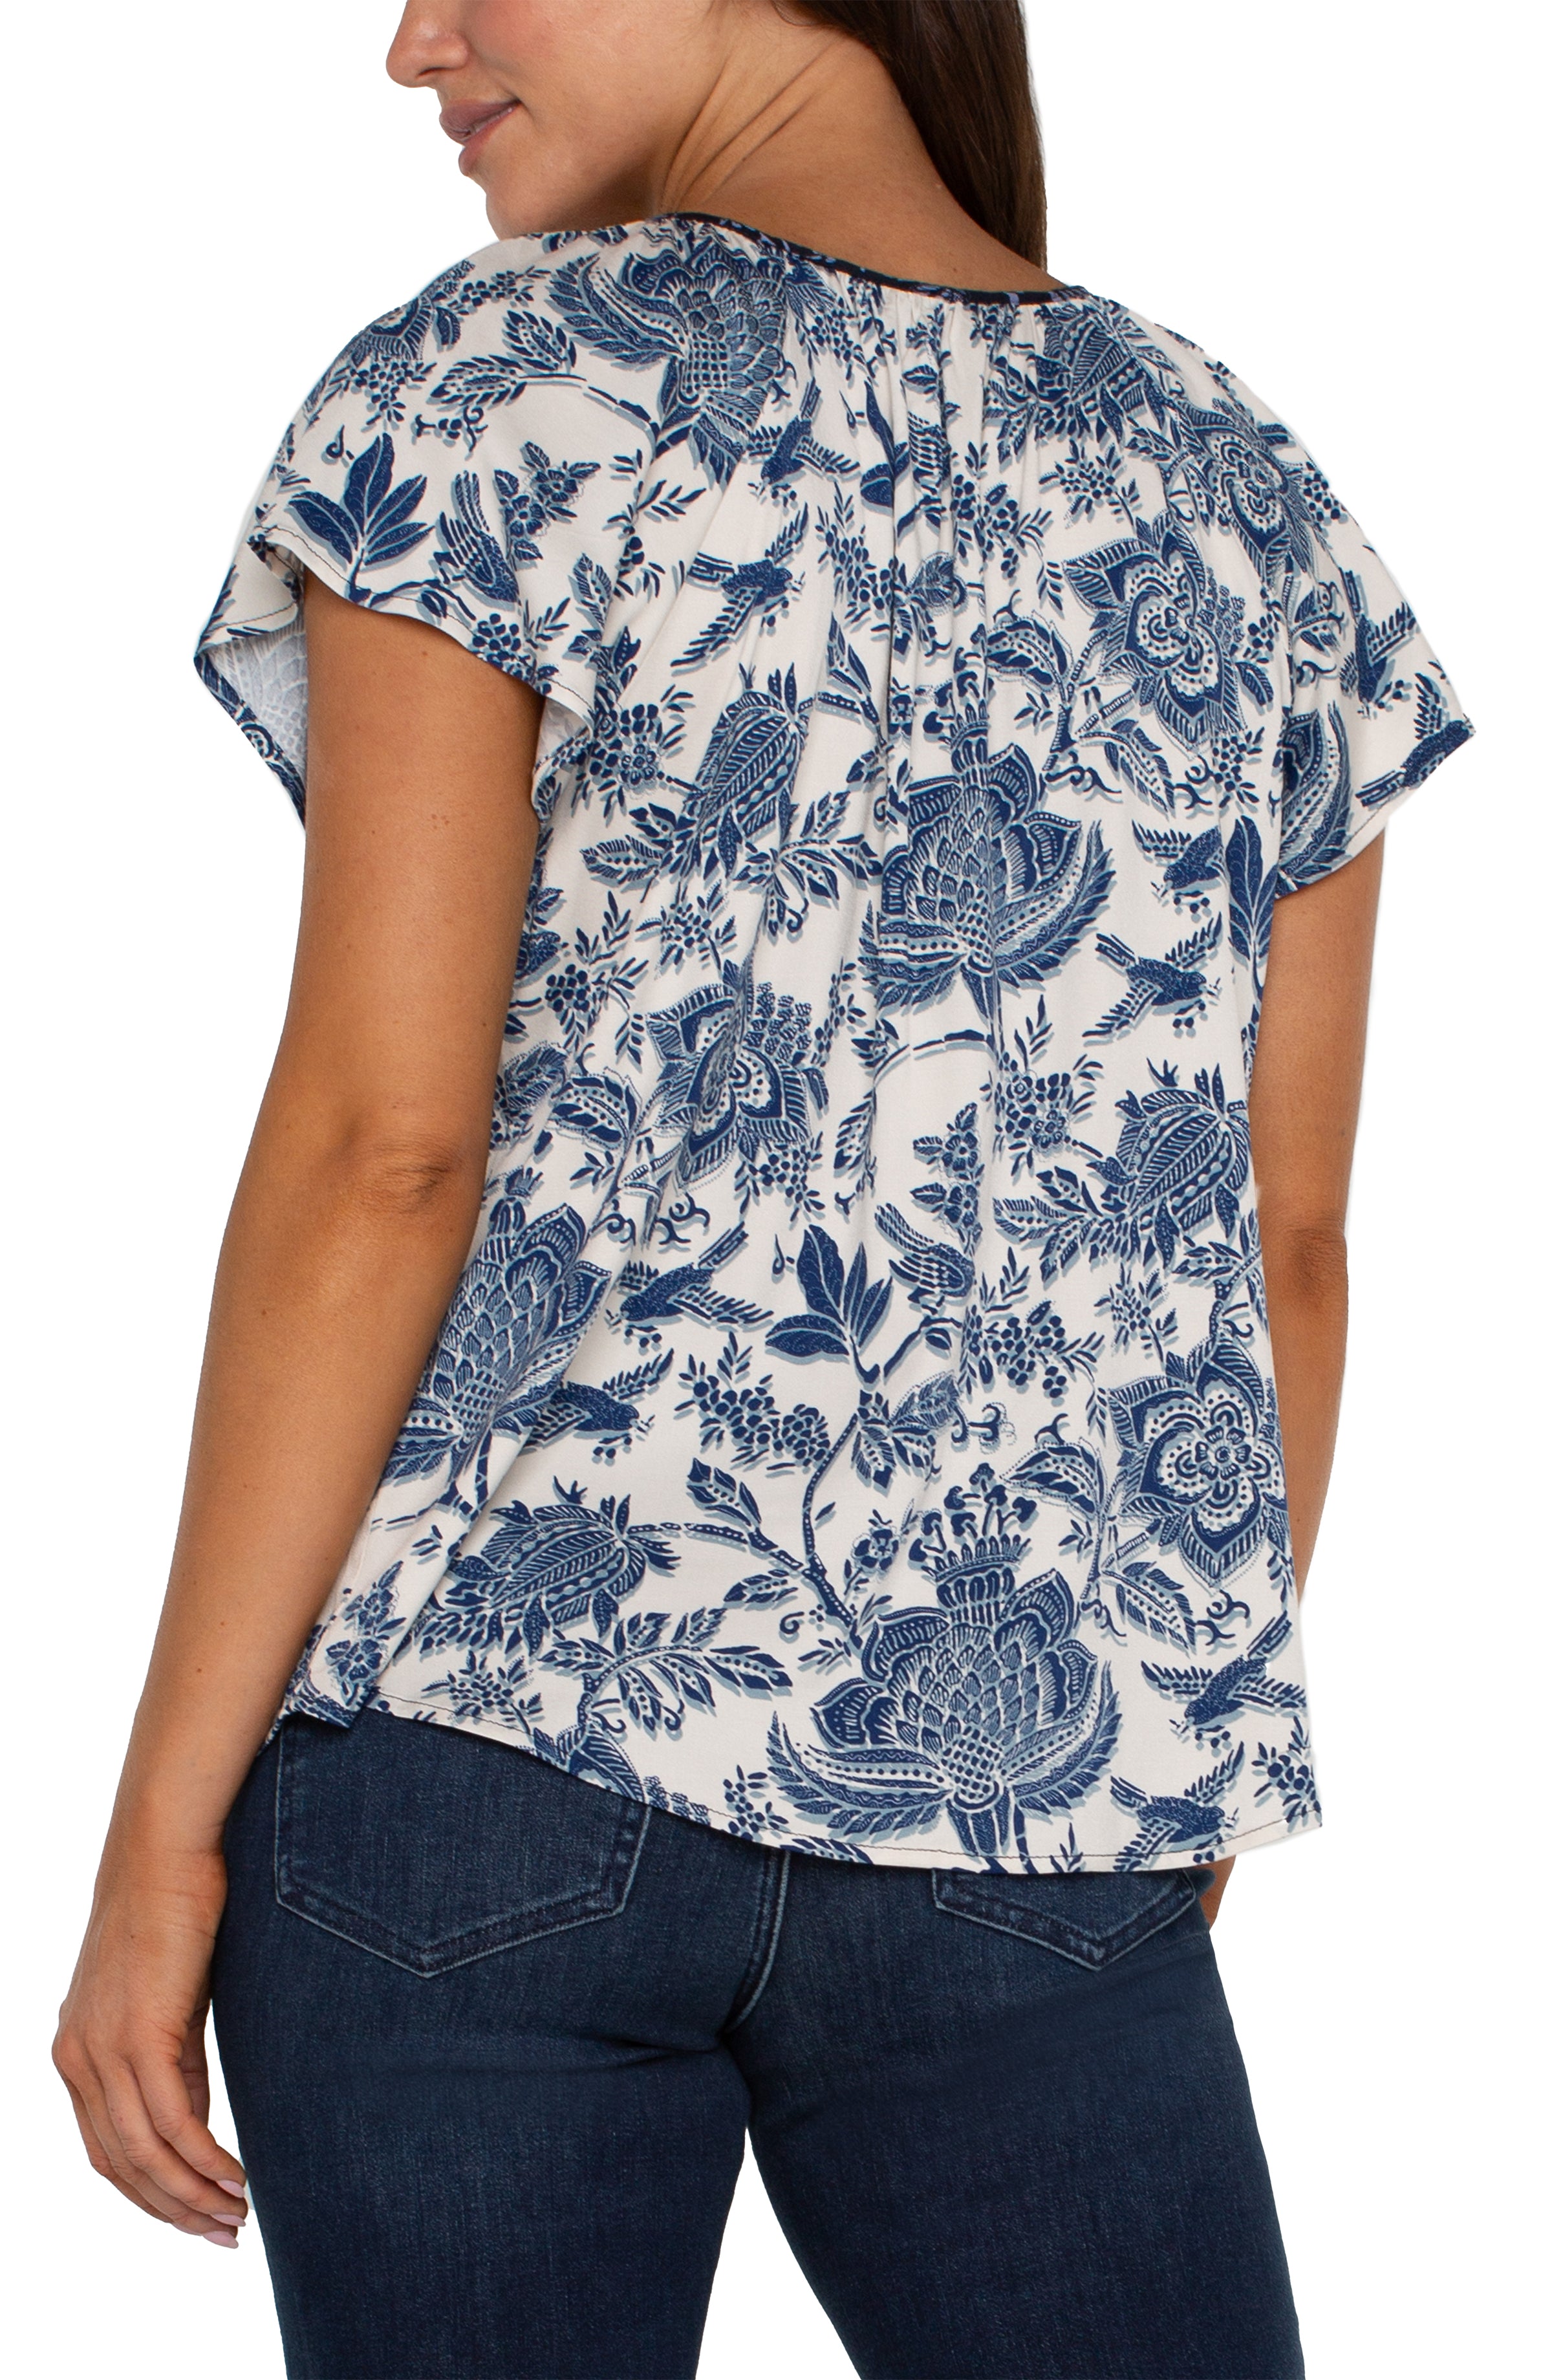 LVP Woven Top w Front Tie - Galaxy Floral Back View